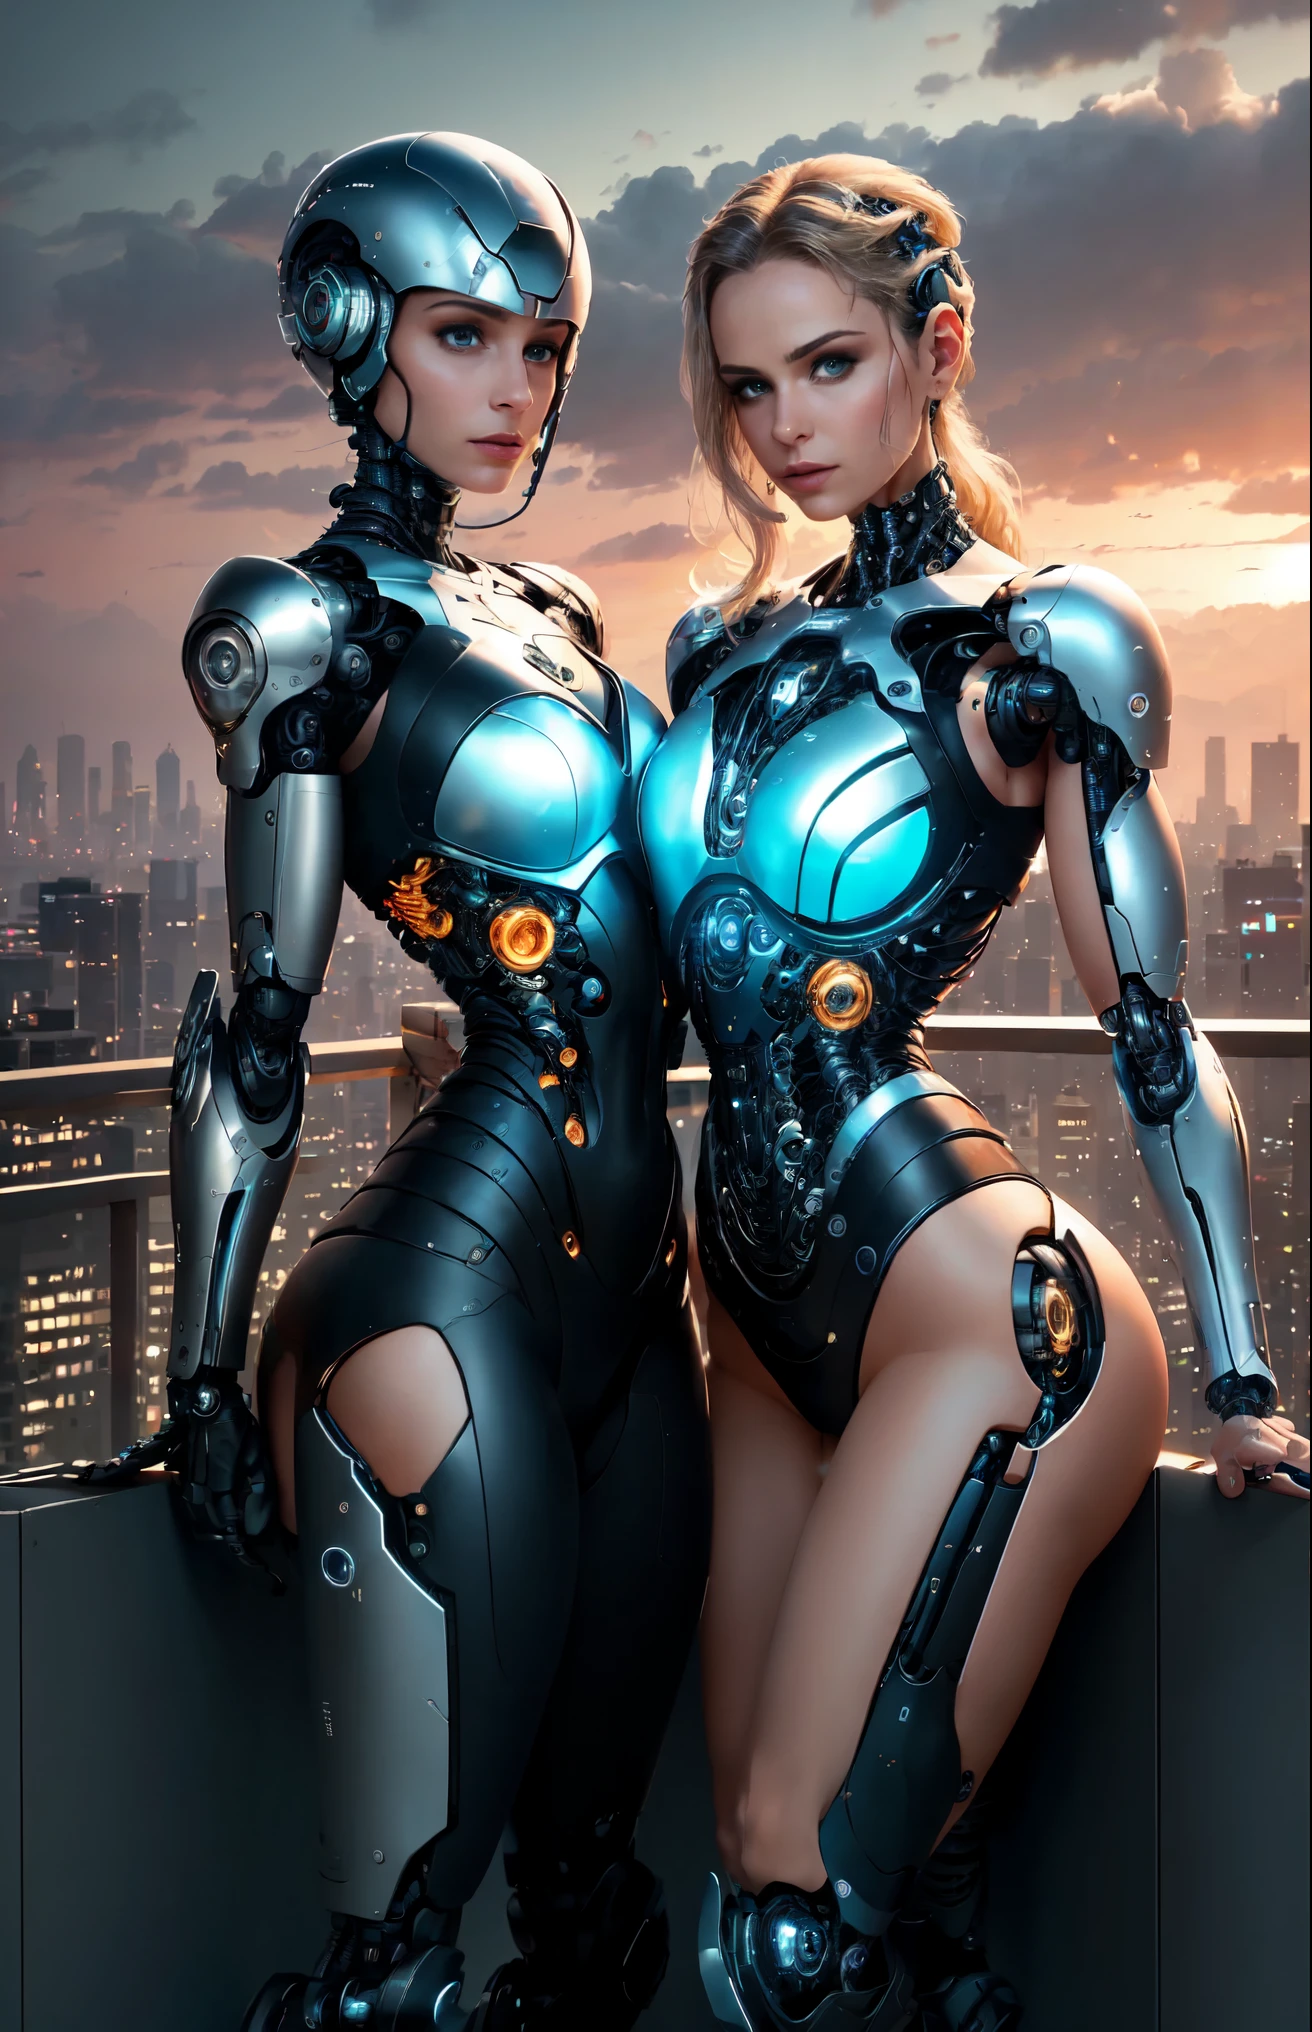 On the rooftop of a skyscraper, a male cyborg and a female cyborg engage in a sexual relationship. They are both depicted in stunning detail, with intricate details highlighting their magnificent anatomies. The scene is captured in the highest quality, showcasing the absurd resolution of 8K. The artwork is a masterpiece, featuring beautiful and slim bodies that are expertly crafted. The intense focus on intricate details enhances the hyper-detailing of the cyborgs' features, making them appear even more realistic. The lighting is soft and natural, casting a gentle glow that accentuates their natural skin textures. The overall composition of the artwork is carefully cropped to showcase the enticing 1/2 body of the cyborgs. The HDR technology further enhances the visual impact of the image, resulting in a truly breathtaking piece.